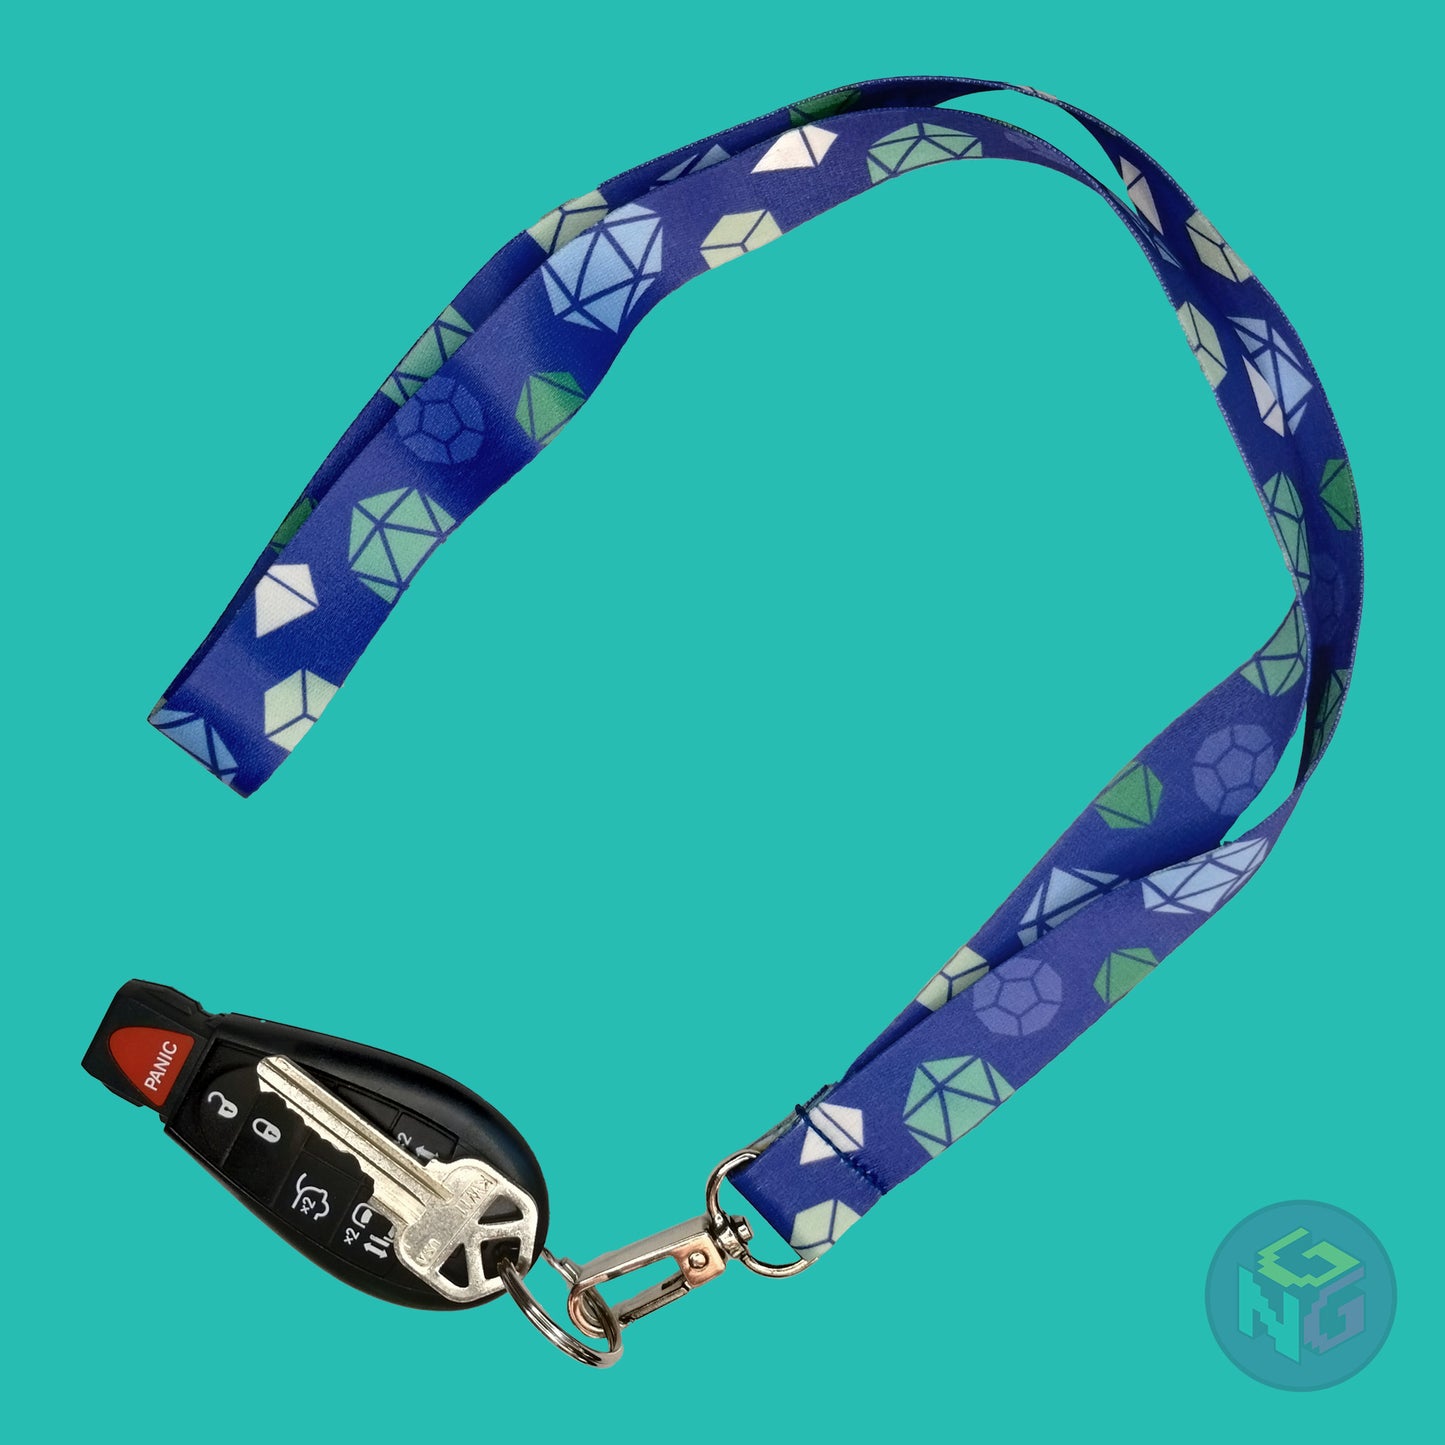 blue dnd gay lanyard showing the green, blue, and white tabletop dice with a key fob clipped to the end of the lanyard